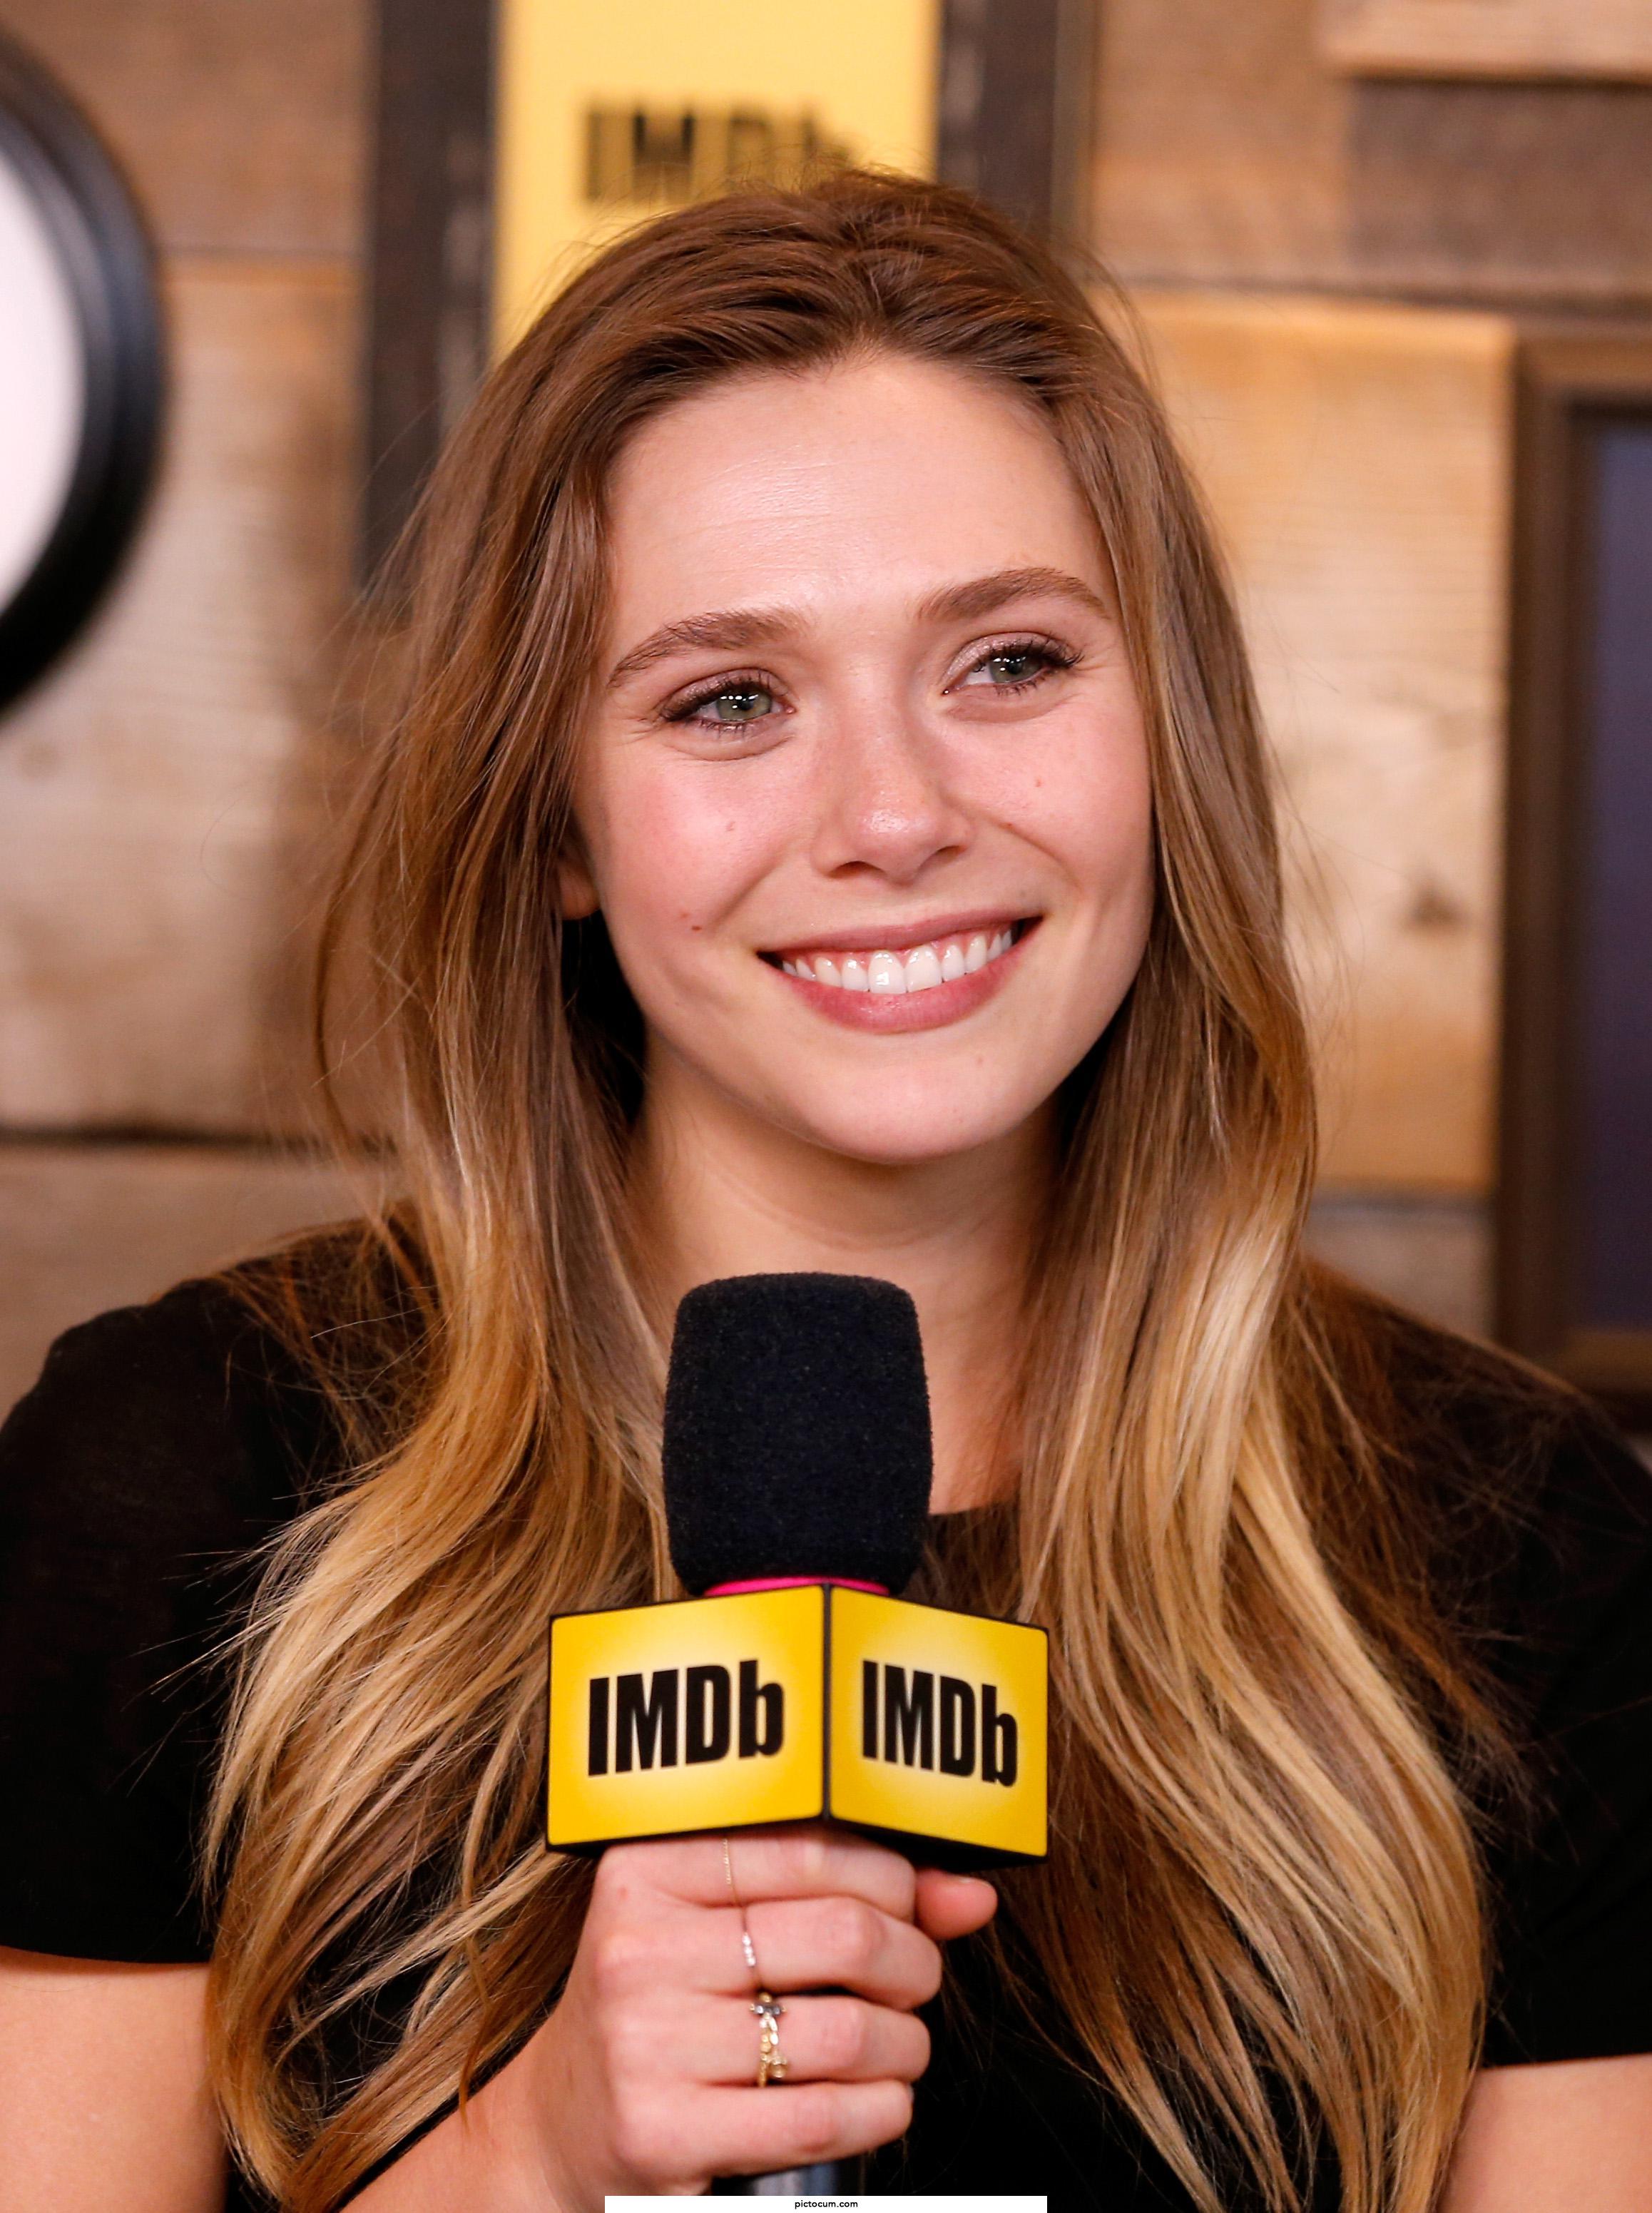 Wish it was my Cock What Elizabeth Olsen had in her Hand Instead of that Microphone. She Would Have Given me a Intense Handjob. She's so Fucking Gorgeous, Love her Cute Smile.